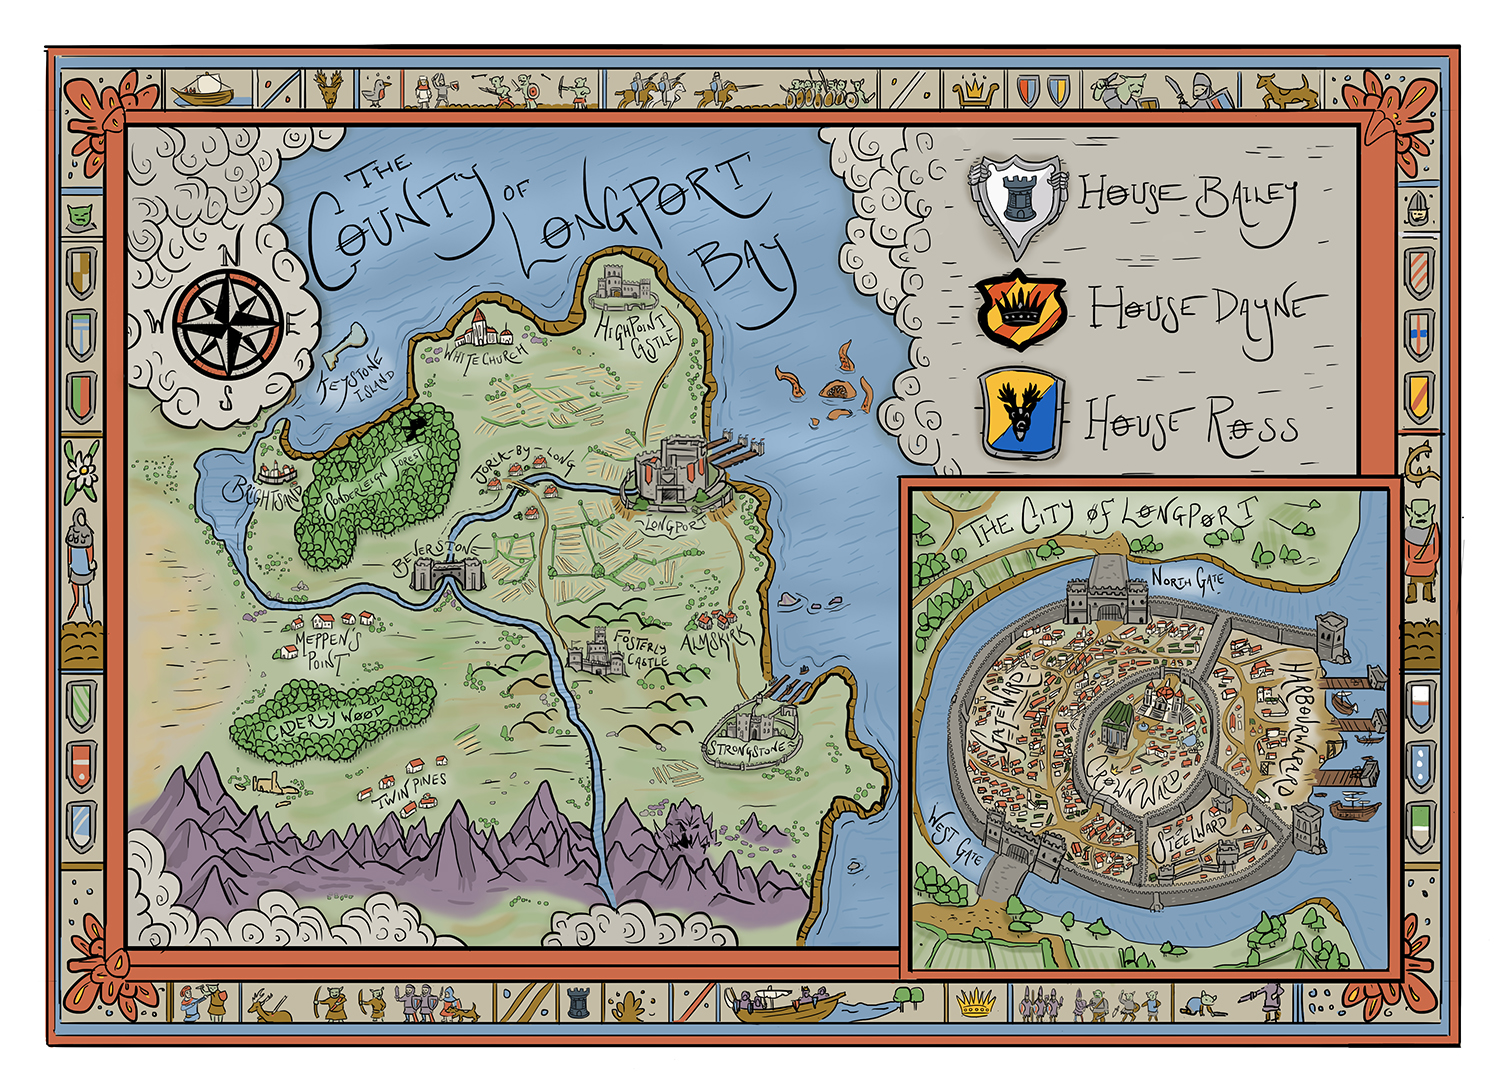 Medieval fantasy map for Legendary Kingdoms by The Noble Artist. Fantasy cartography art